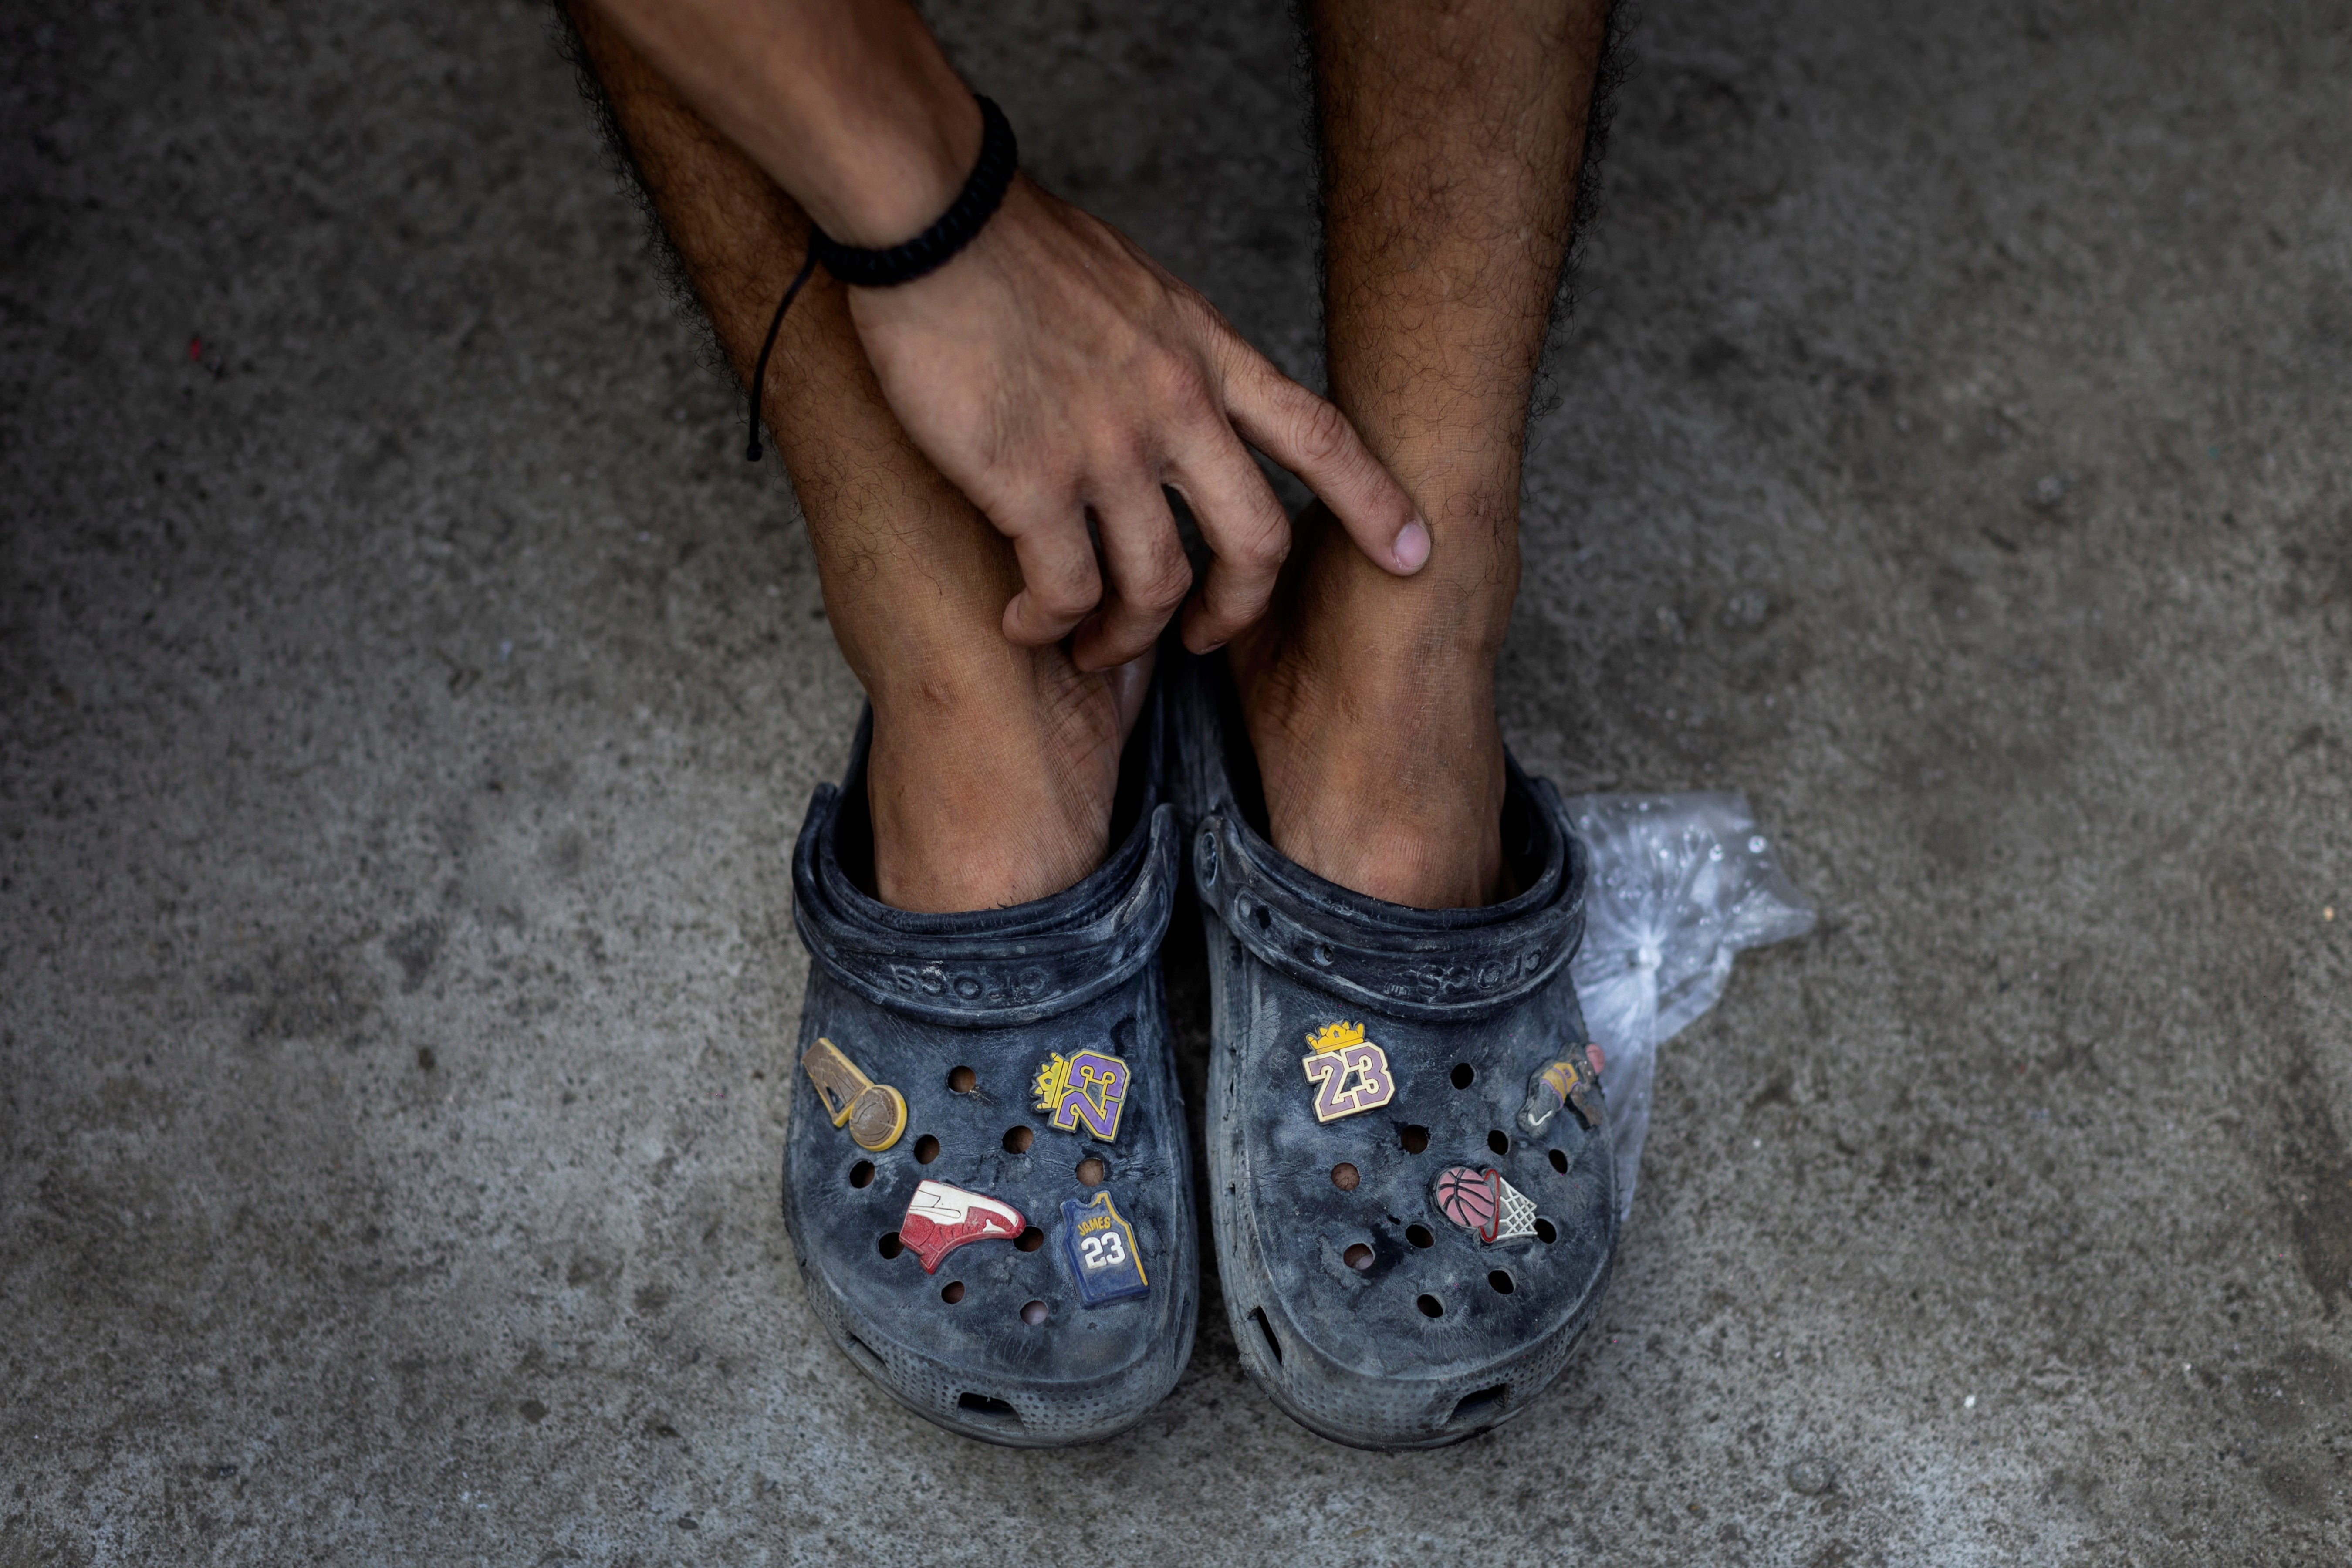 A teenage boy wears basketball-themed rubber slippers while watching a basketball game at the community-built court Baryo Aroma in Tondo, Manila